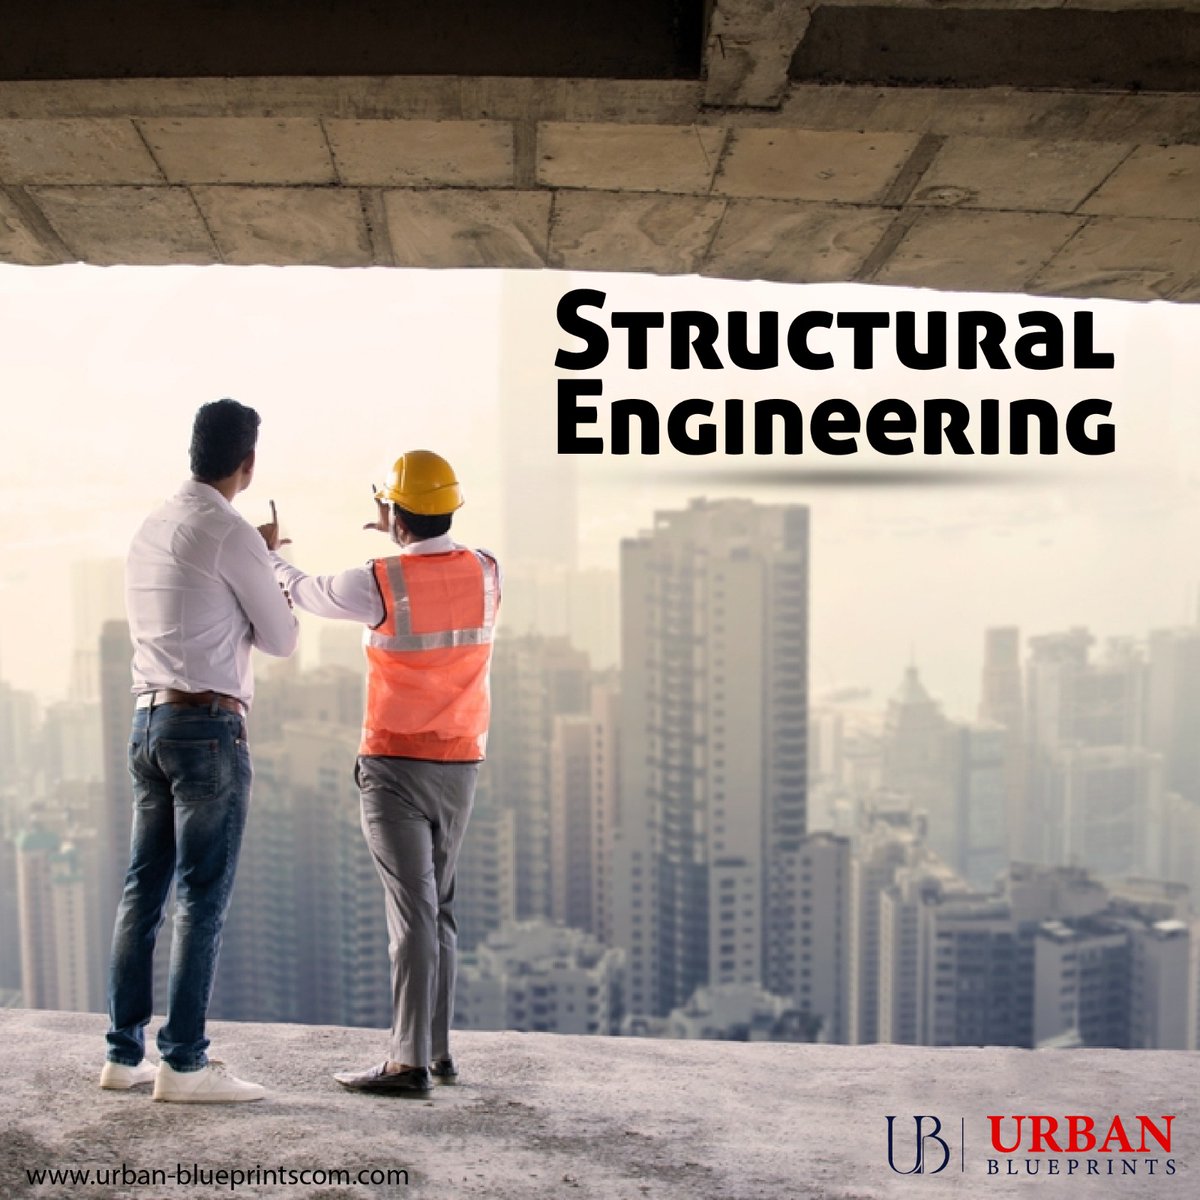 Structural engineering is the silent force behind the skylines we admire and the bridges we traverse daily. Beyond merely erecting buildings and bridges, it's the meticulous science of ensuring their longevity, safety, and function.
.

#urbanblueprints #structuralengineer 🎯🧱🏘